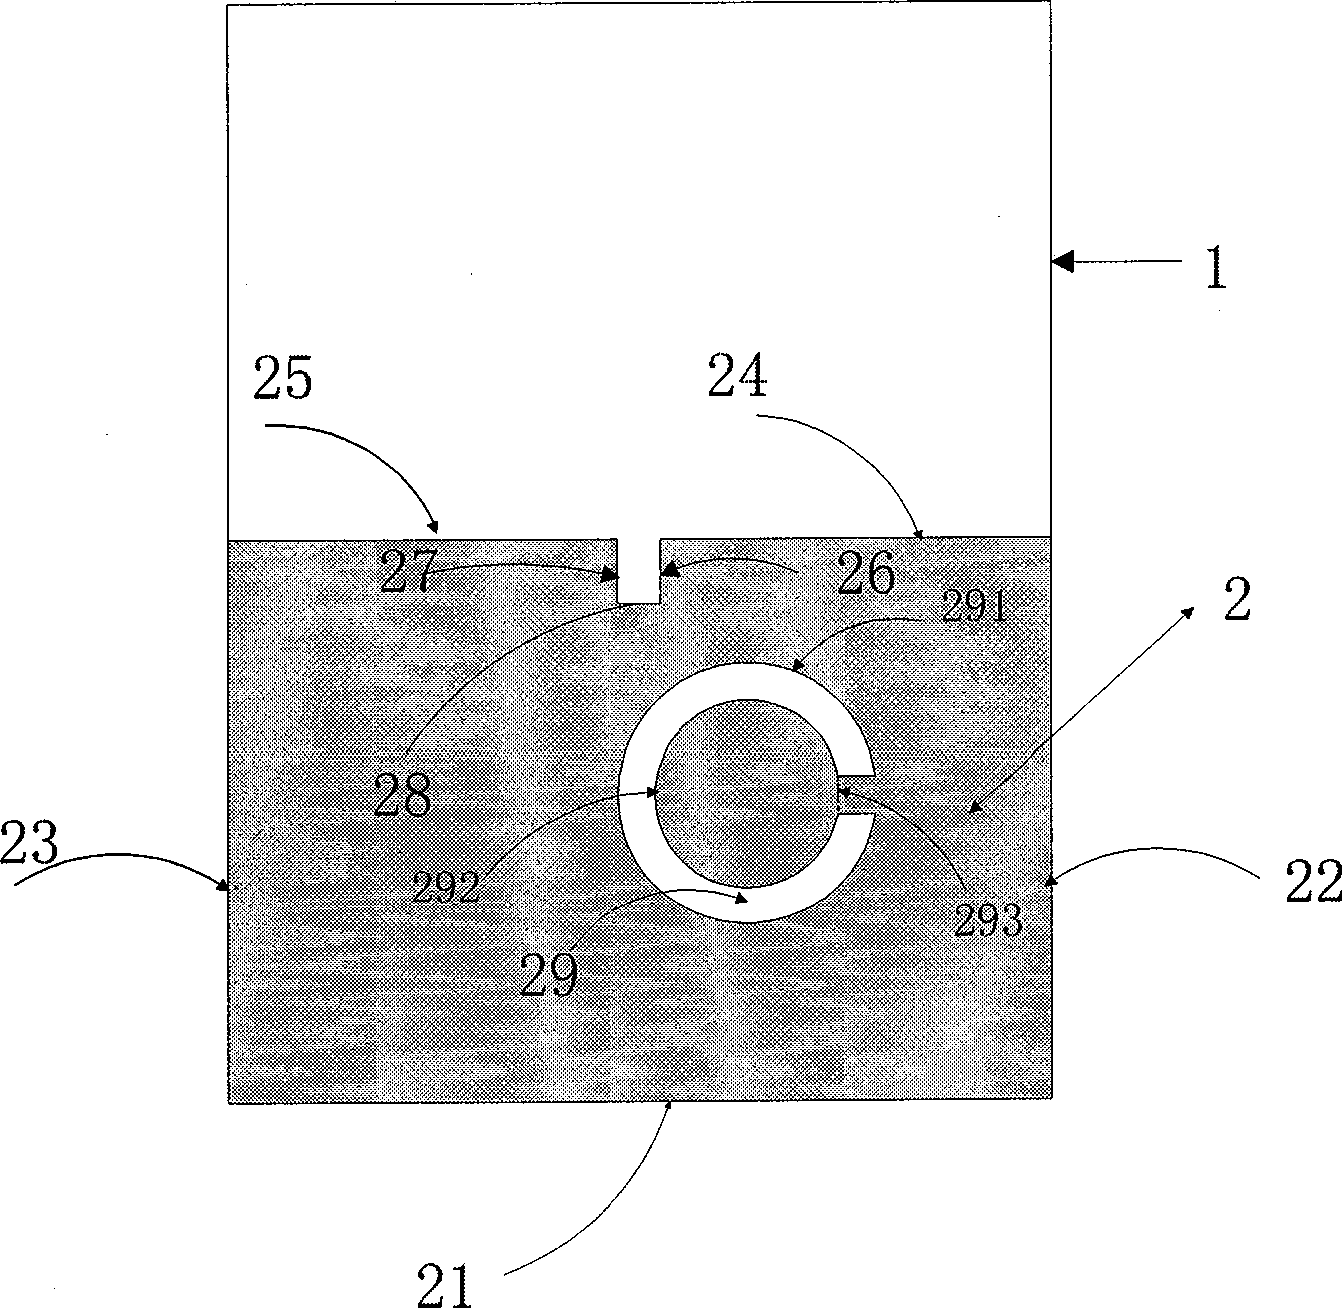 Small-sized plane wideband antenna capable of filtering